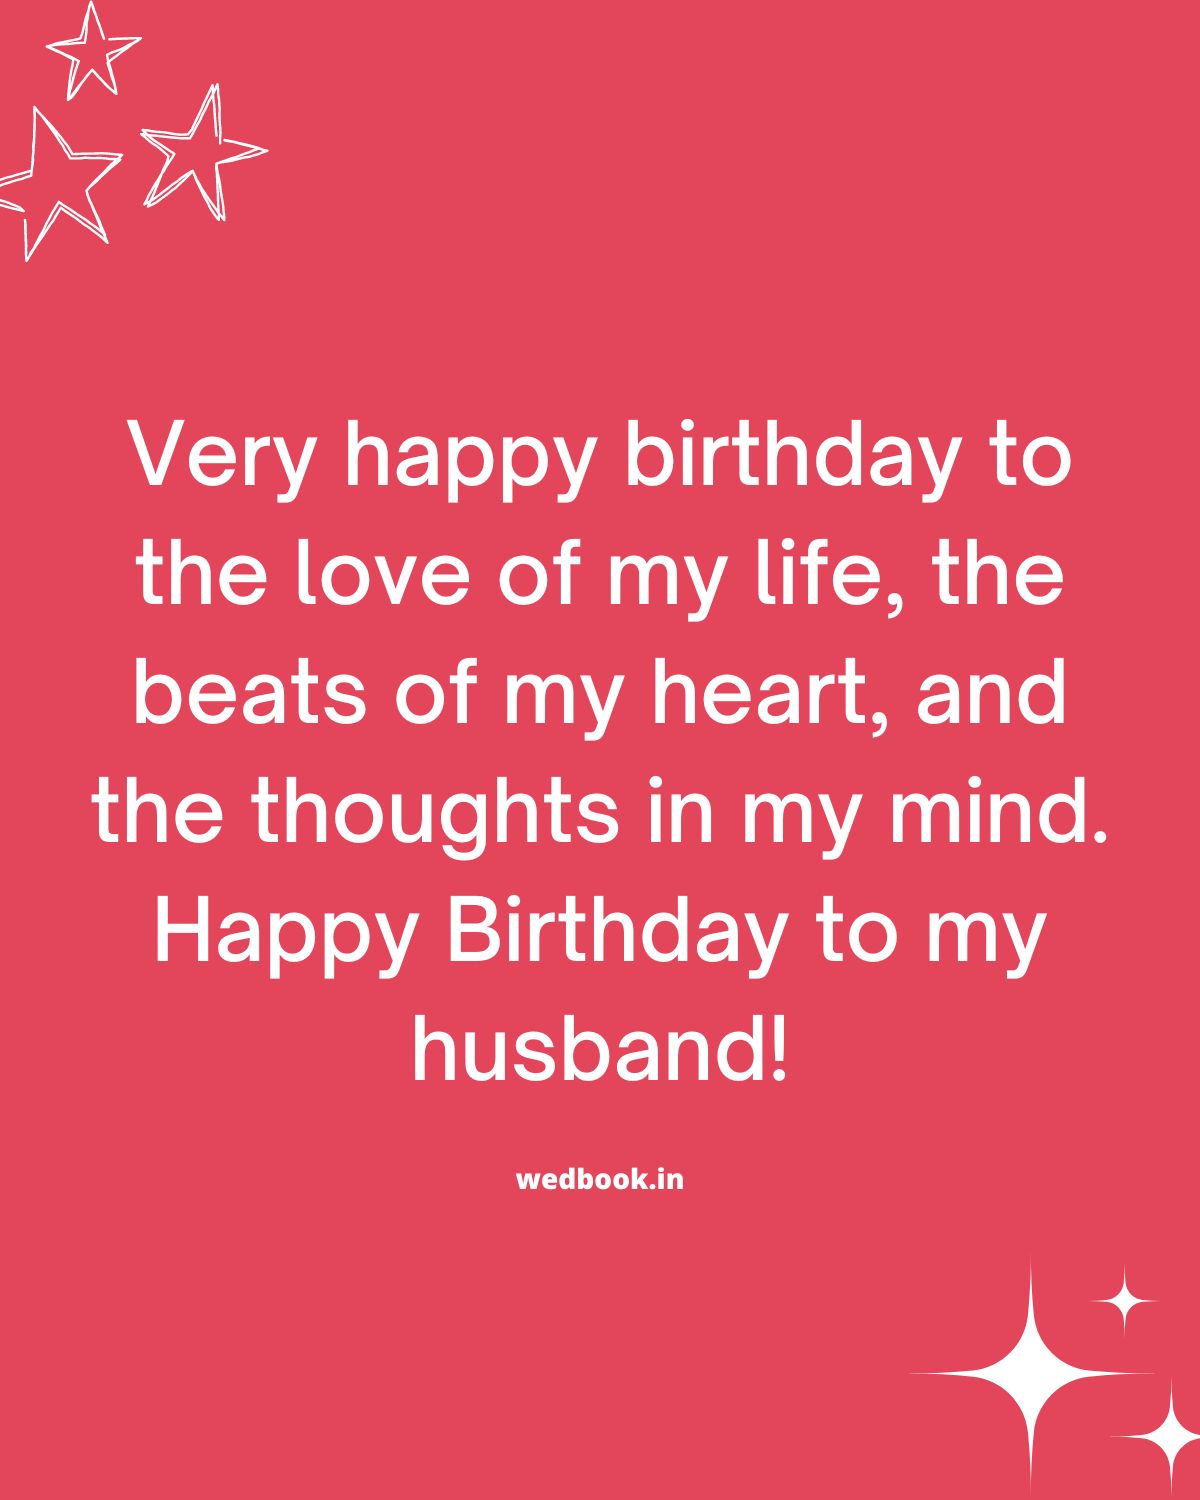 151 Birthday Wishes For Husband Romantic And Unique Wedbook 4689